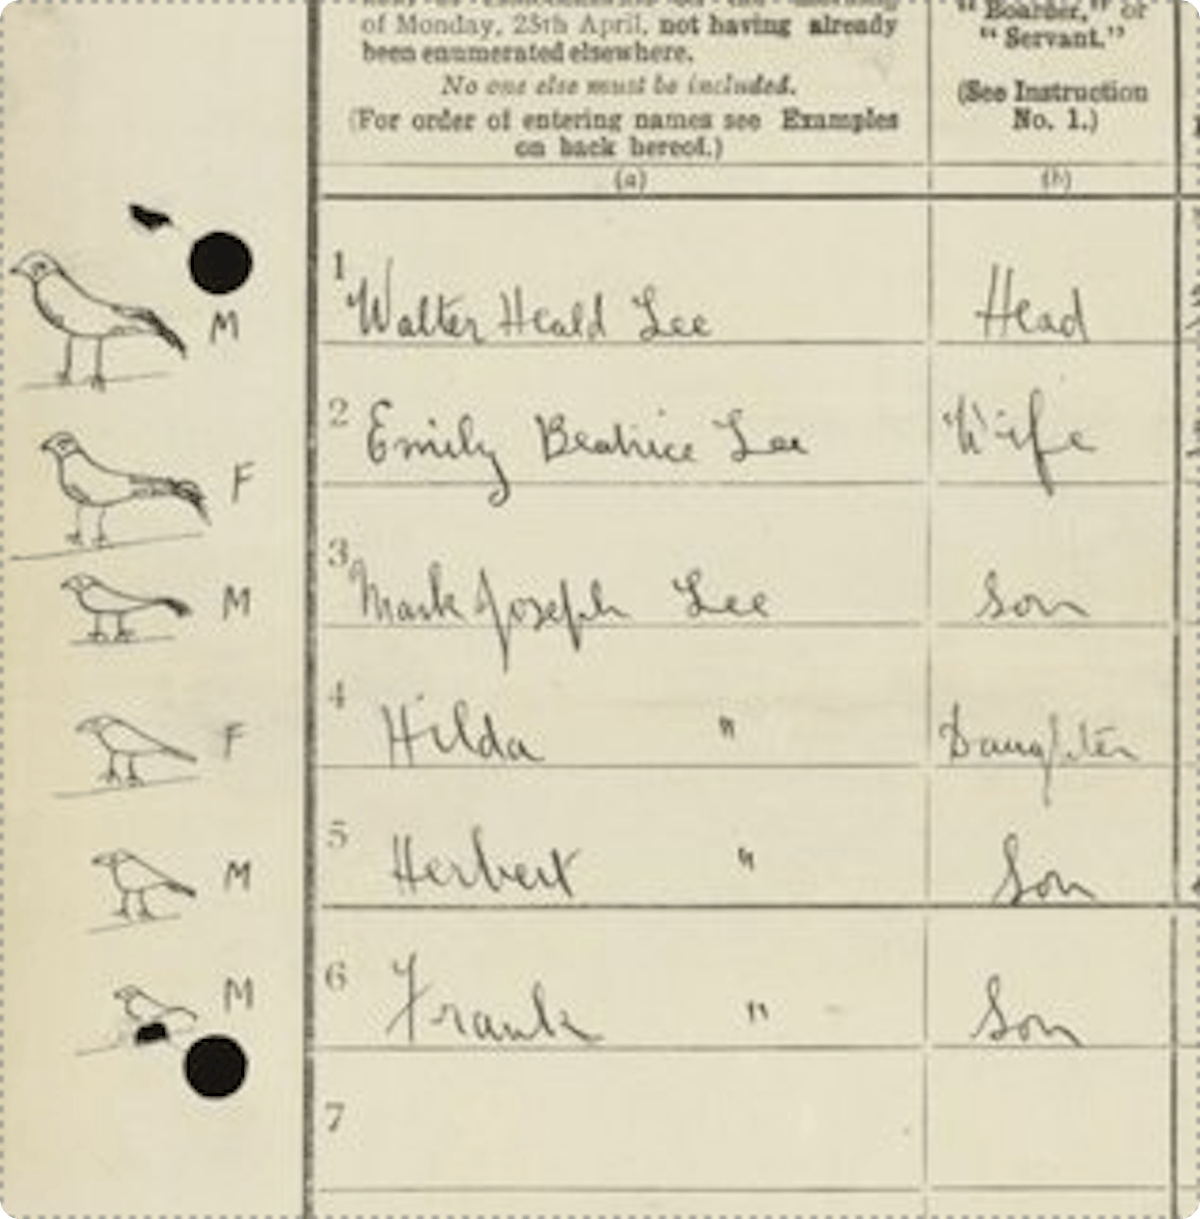 A collection of birds drawn to represent the family on a 1921 Census record.